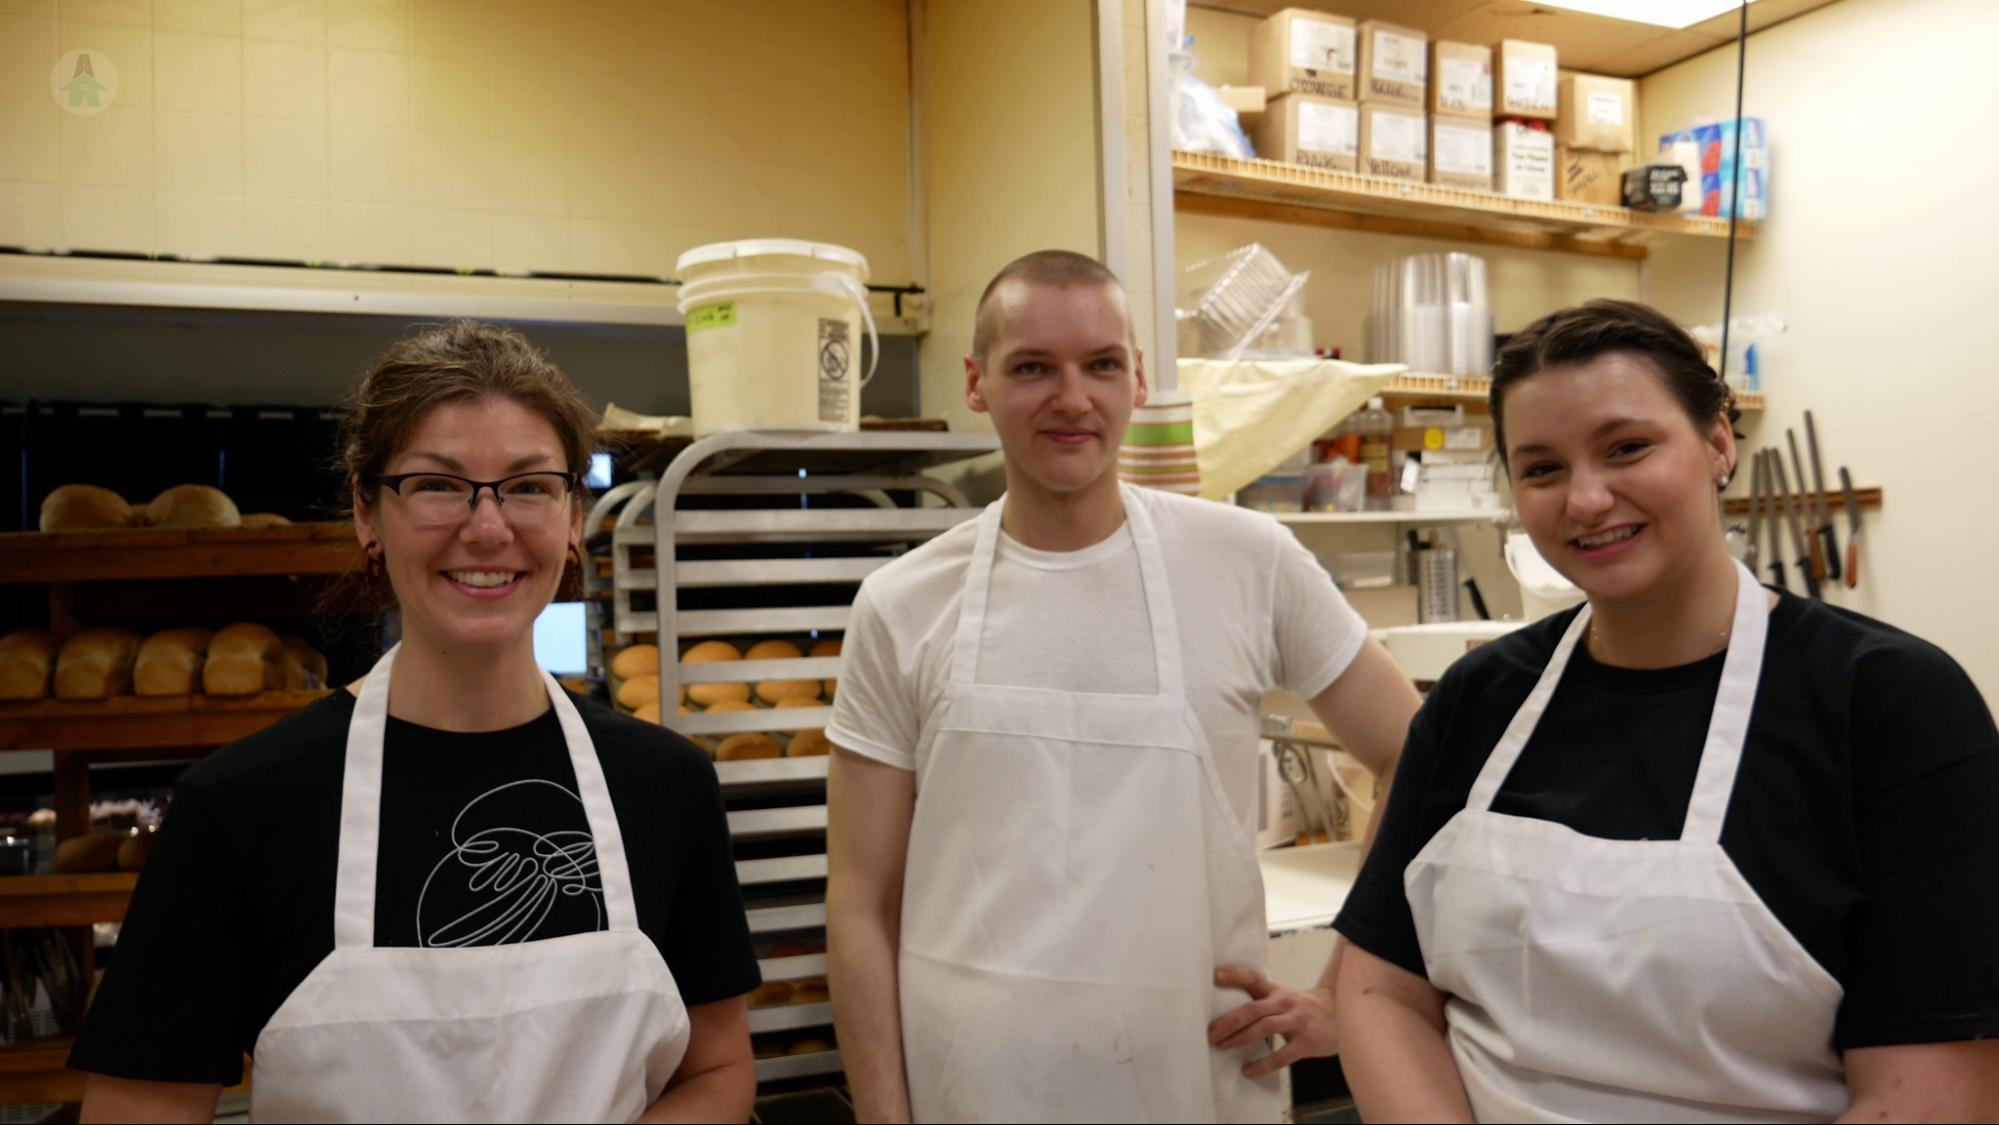 Three of the staff at the Rolling Pin Bakery in Hope, BC (left to right) - Mel, Brent, Cara